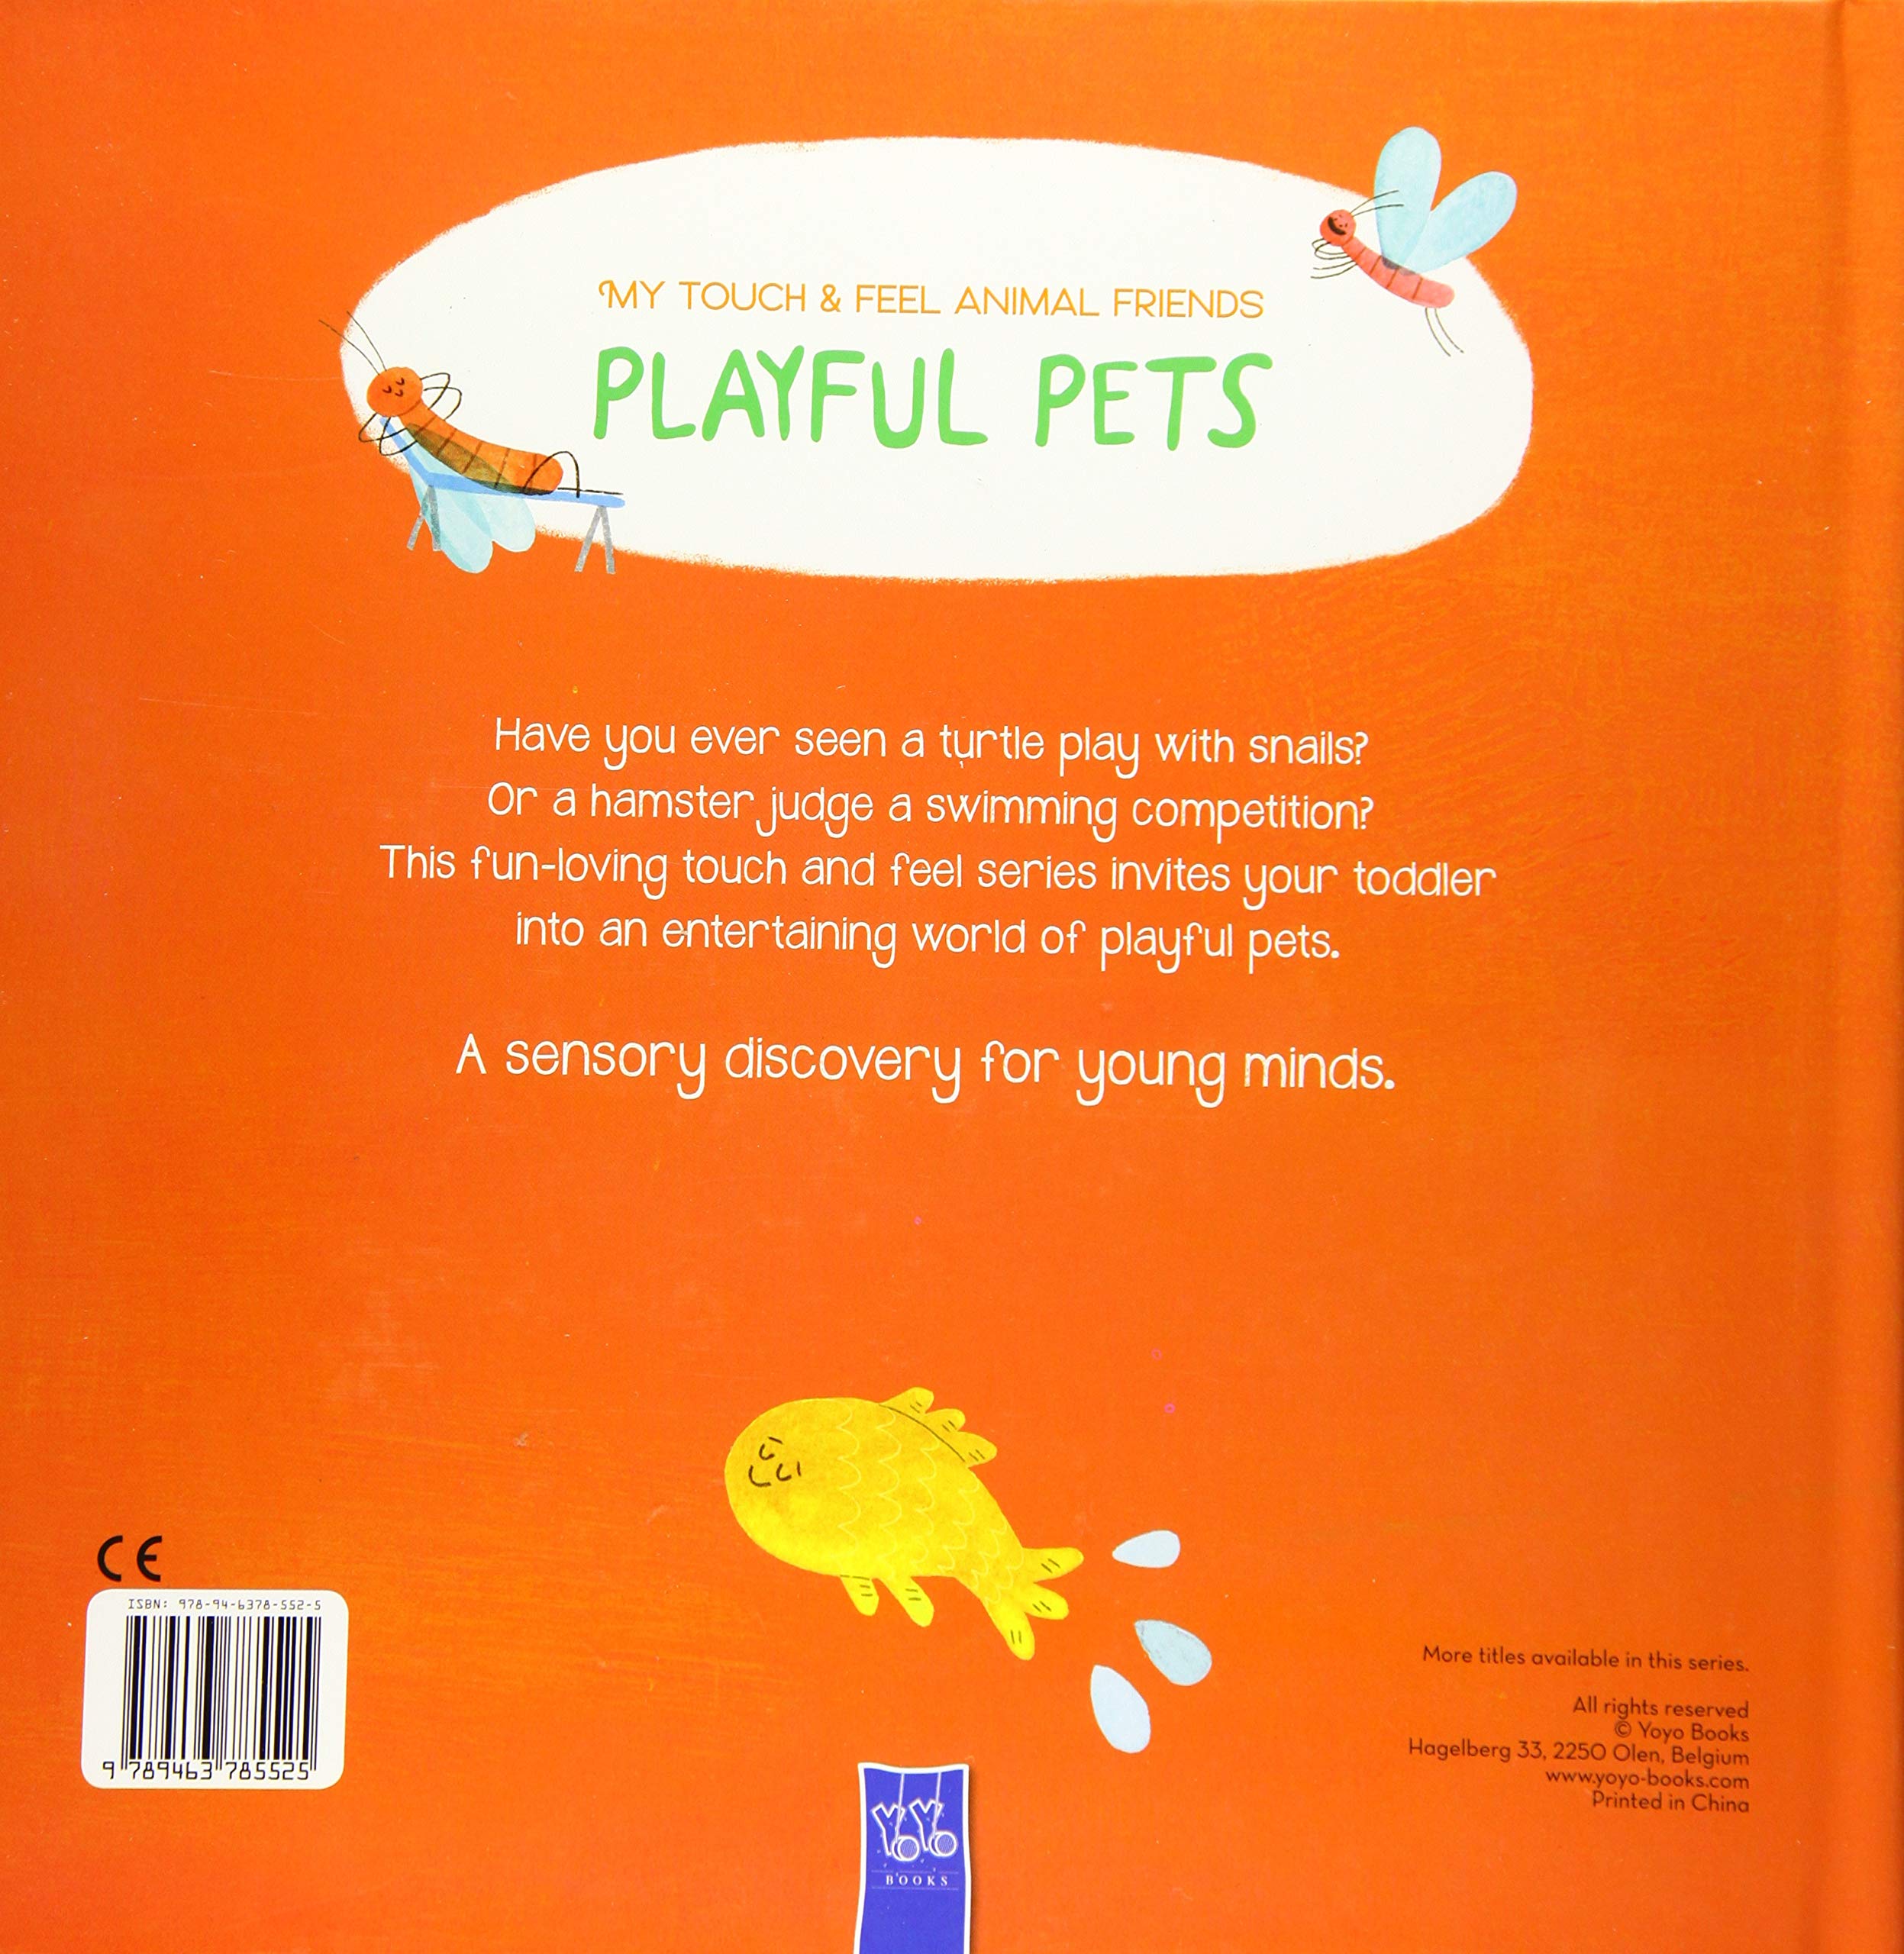 PLAYFUL PETS (MY TOUCH & FEEL ANIMAL FRIENDS)